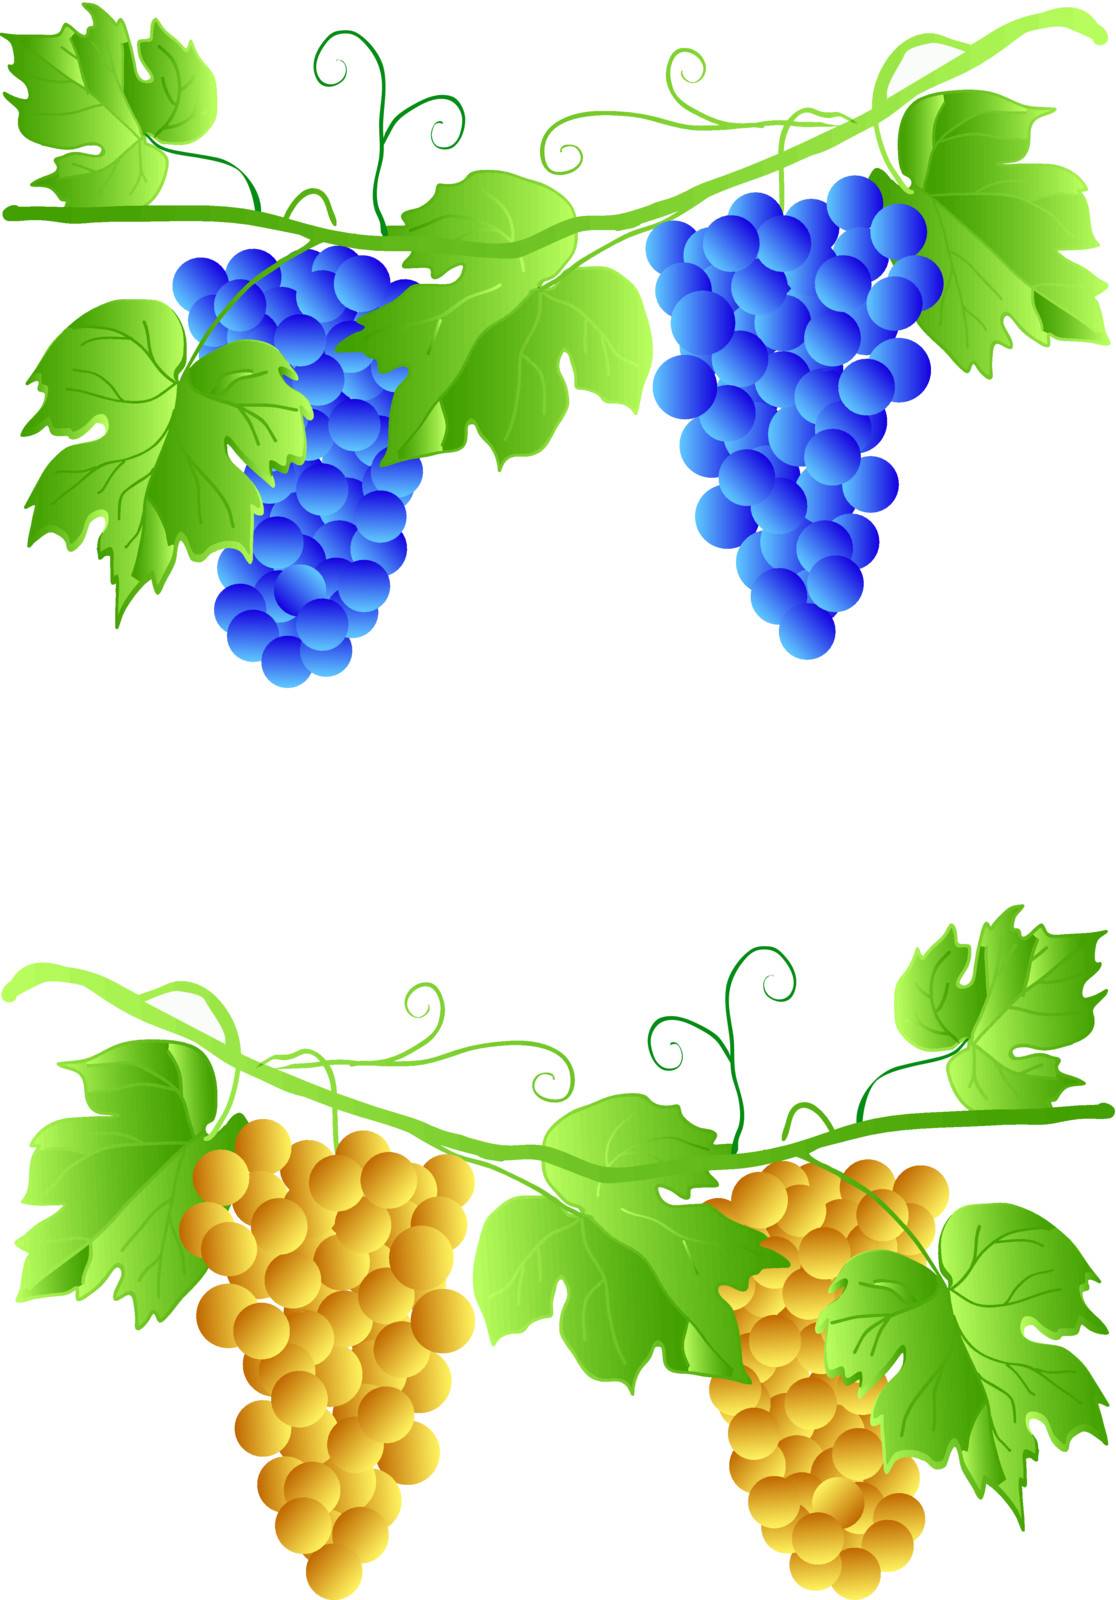 EPS 10 Three cluster of grapes by aarrows